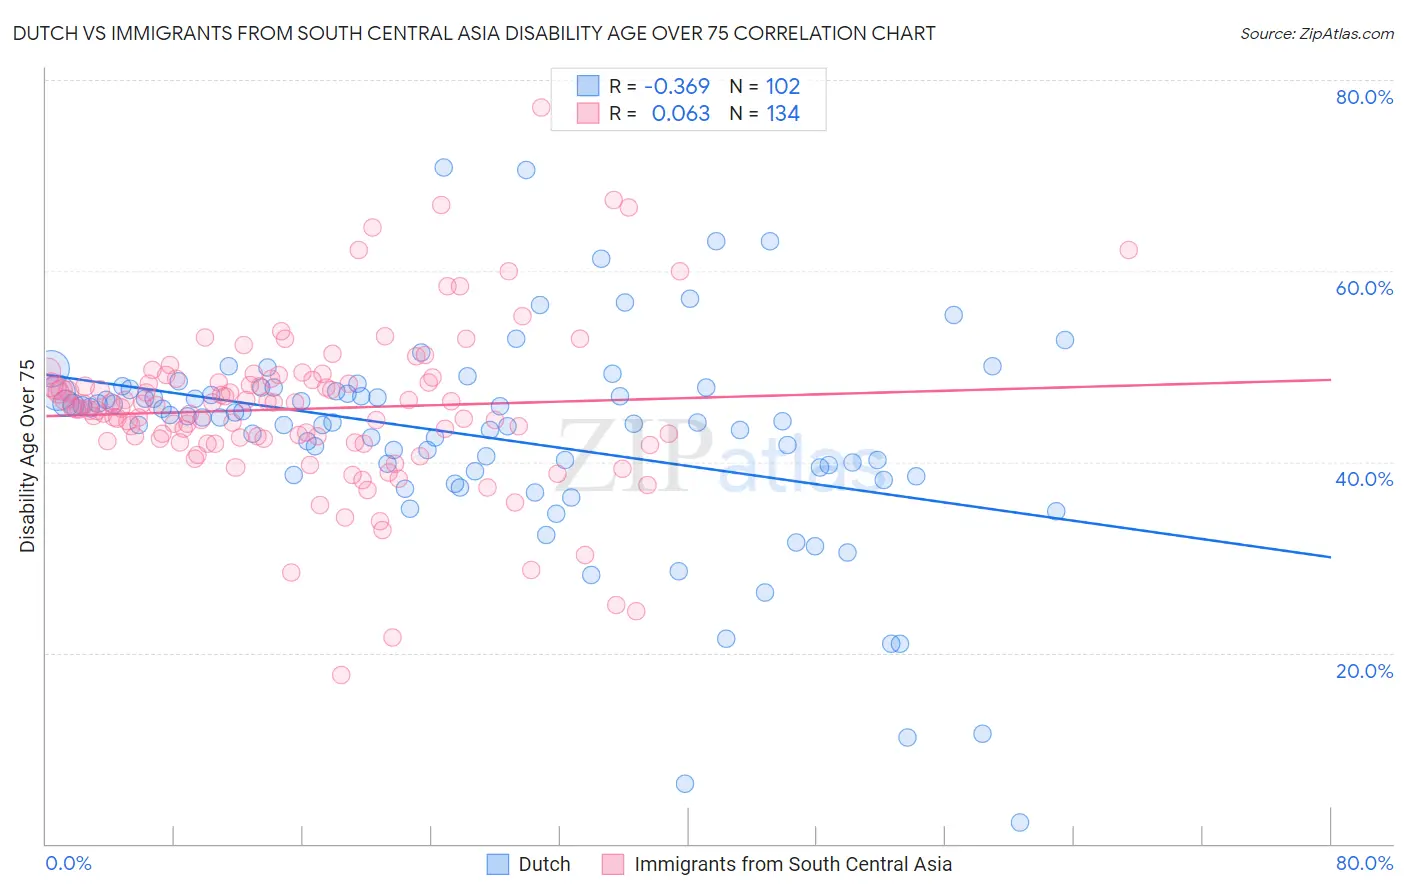 Dutch vs Immigrants from South Central Asia Disability Age Over 75